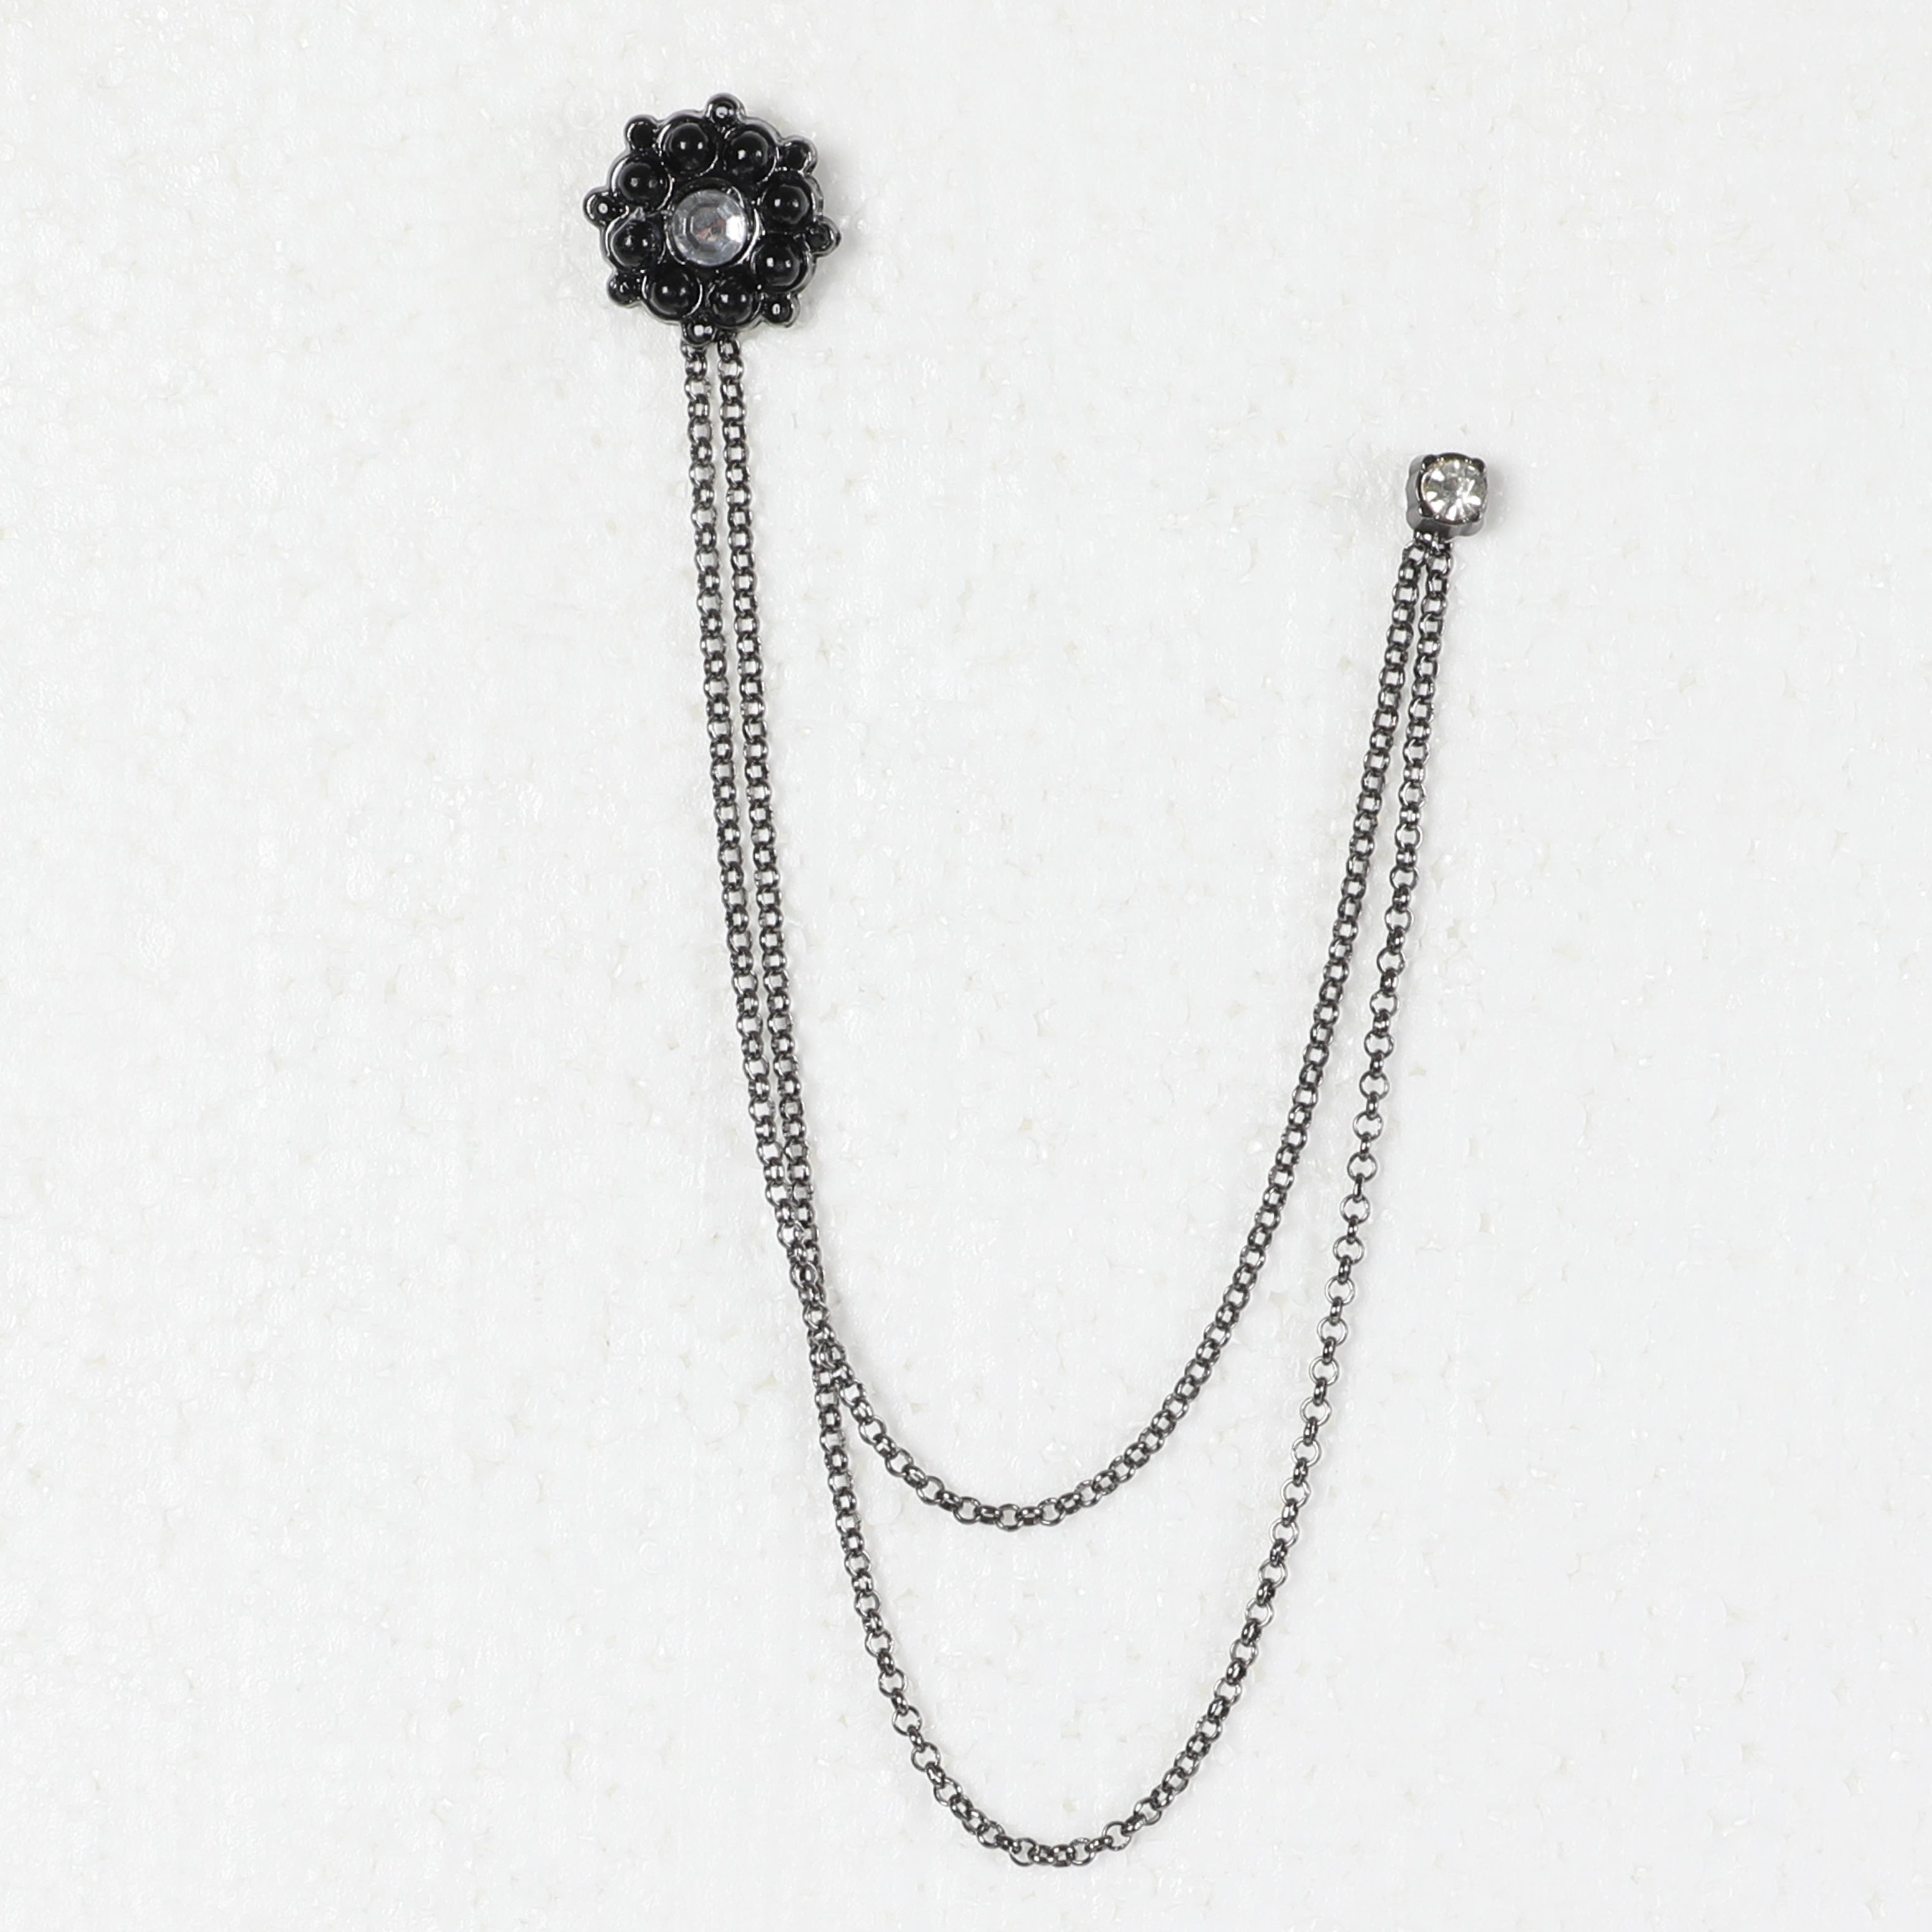 Men Silver Chained Pin With Black Bubbles Design